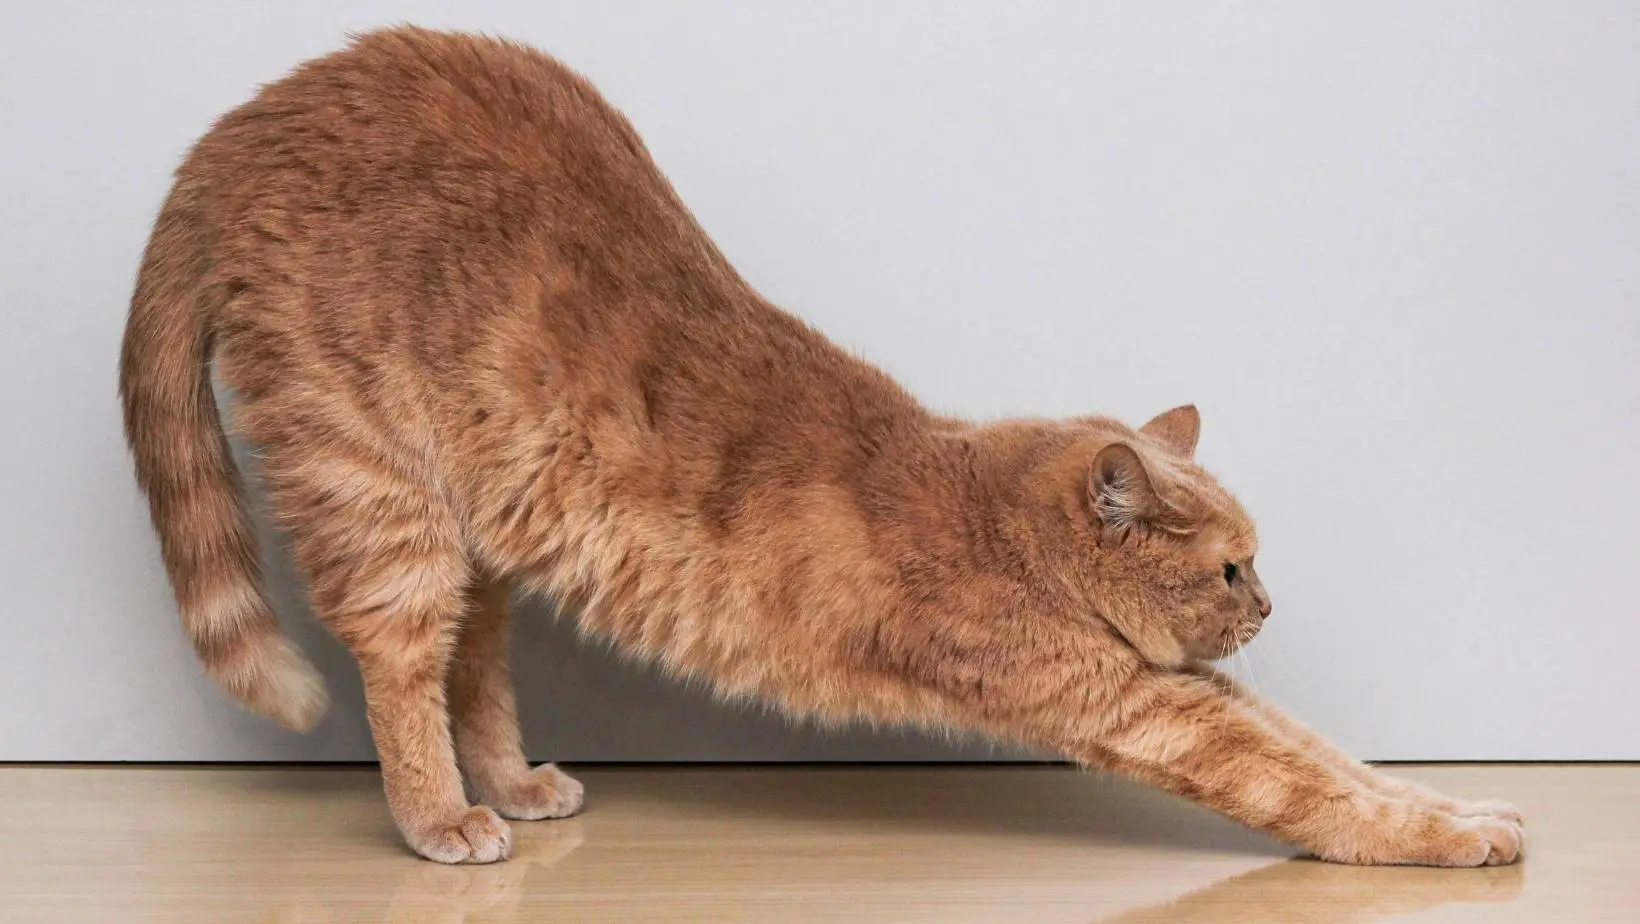 What Does It Mean When a Cat Arches Its Back?